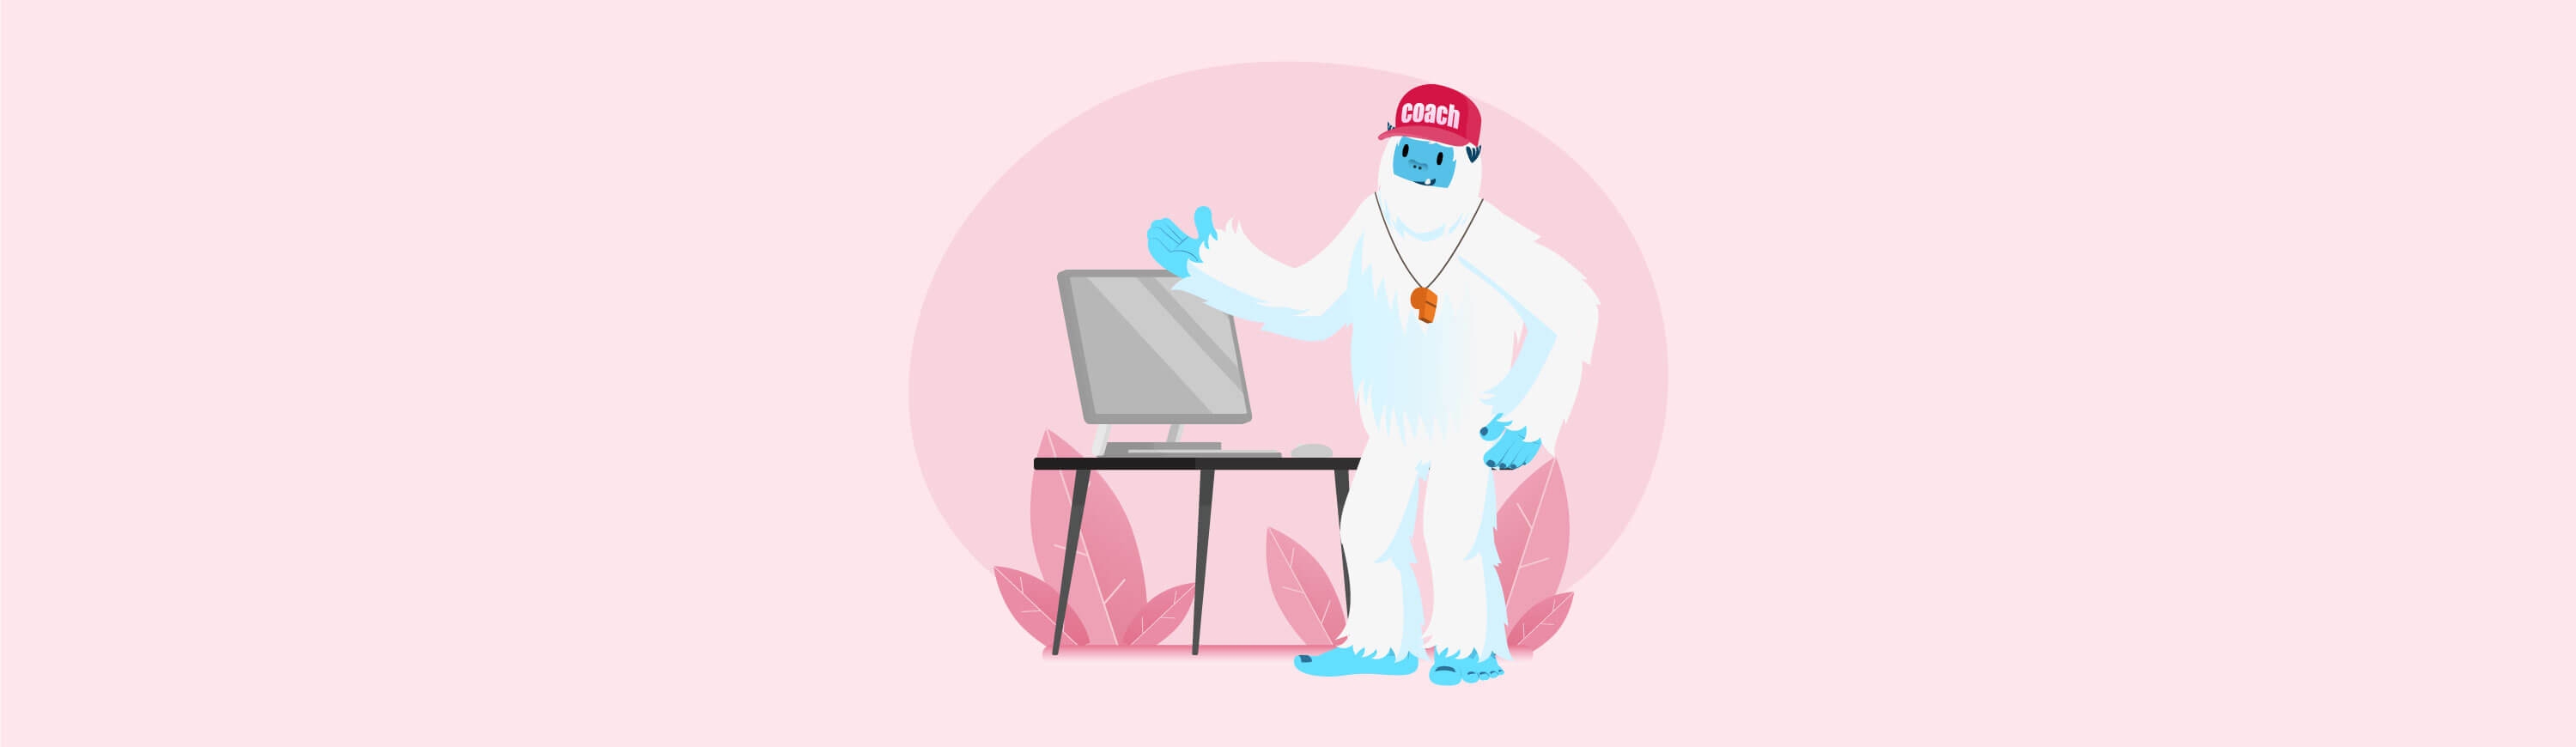 Illustration of Carl the yeti standing by a computer desk with a hat that says coach.